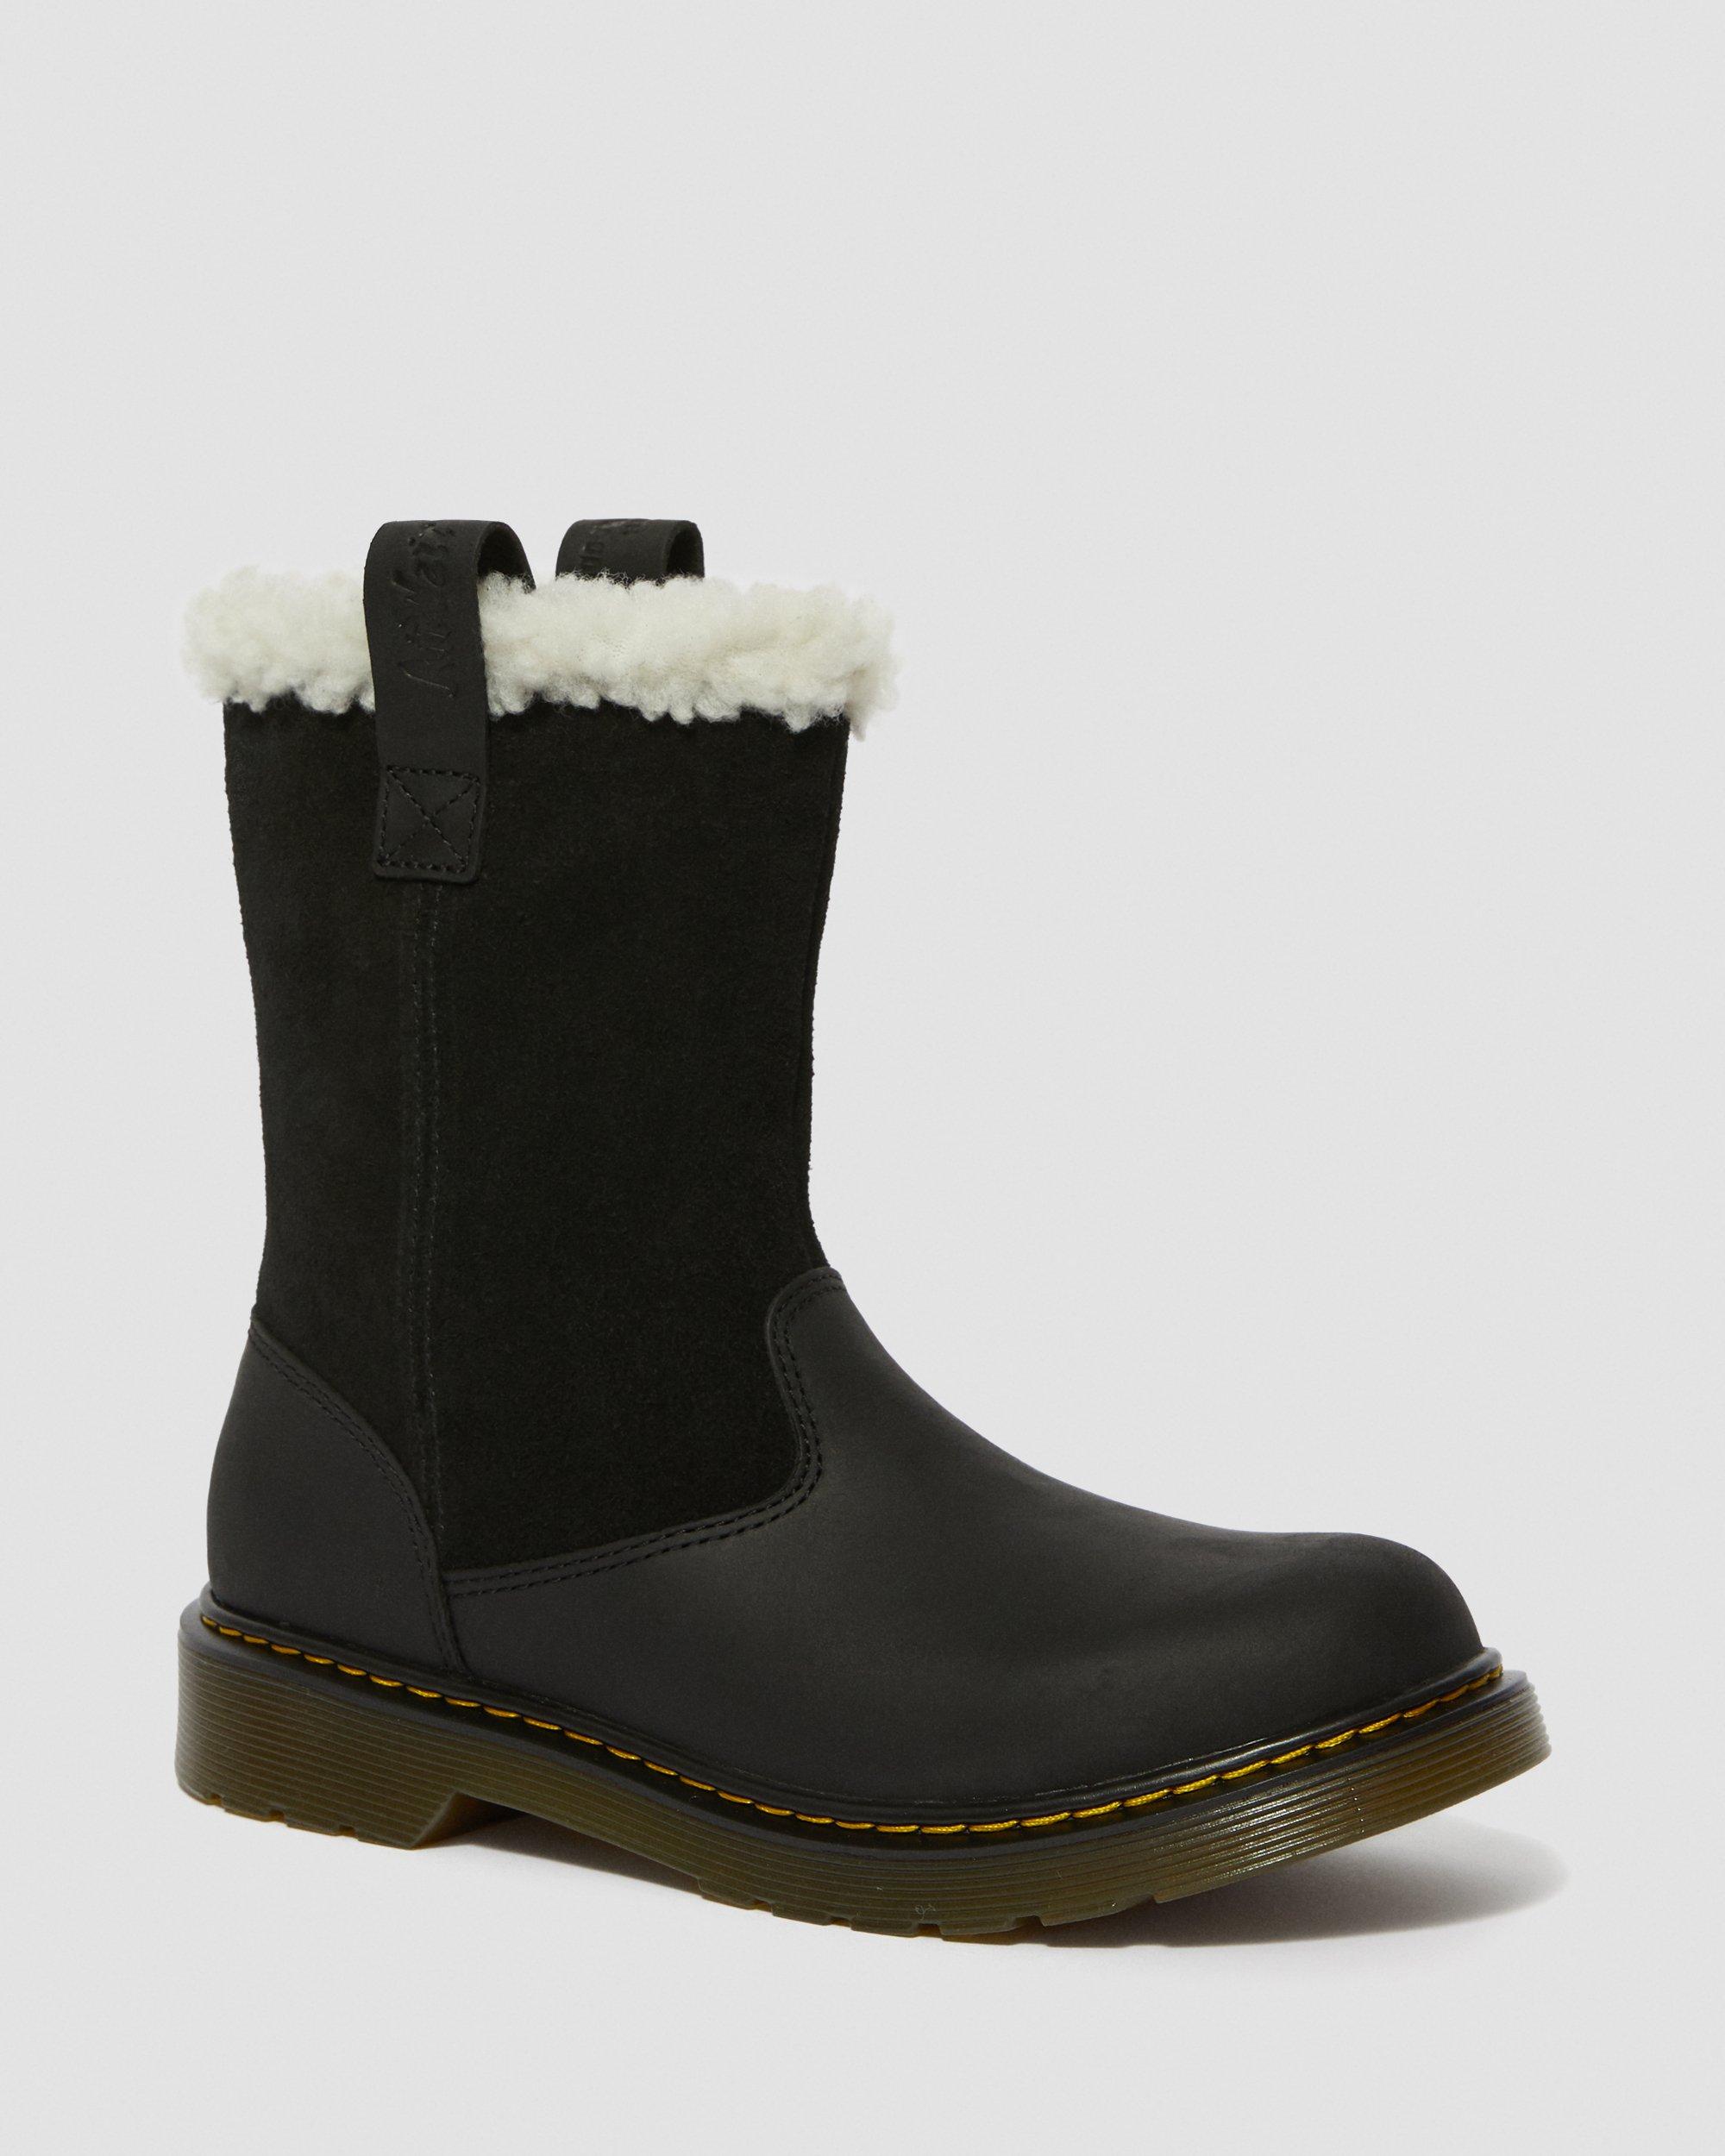 JUNEY YOUTH FAUX FUR LINED HIGH BOOTS 